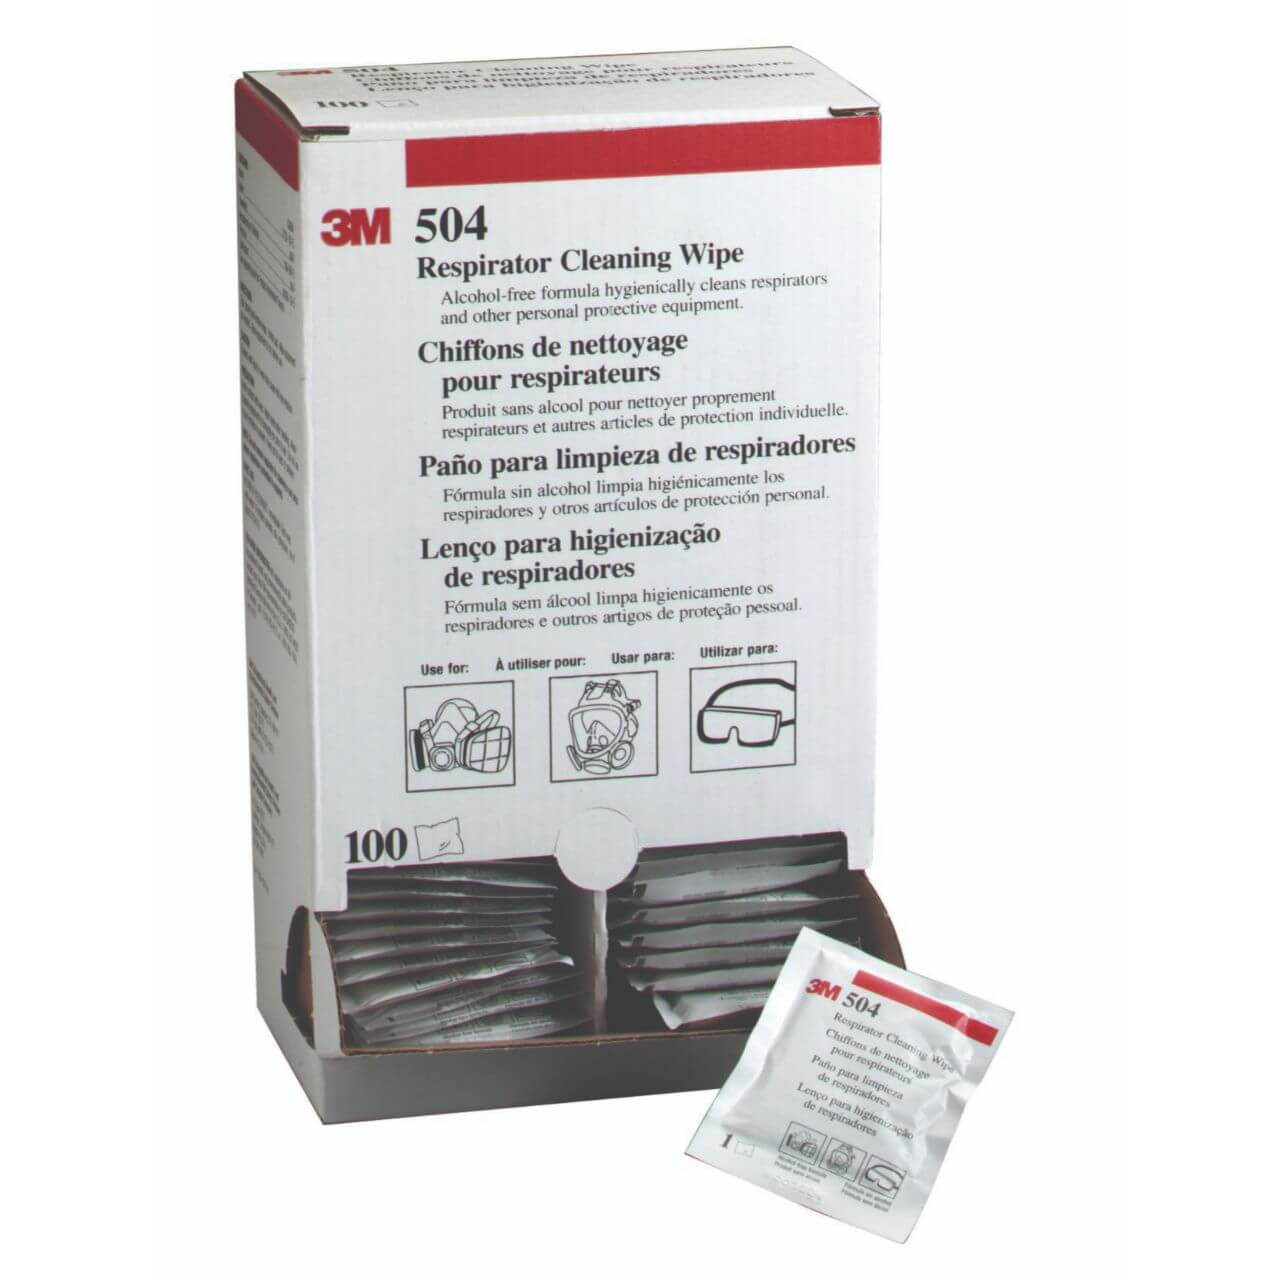 3M Respirator Cleaning Wipes 504/07065 100/box